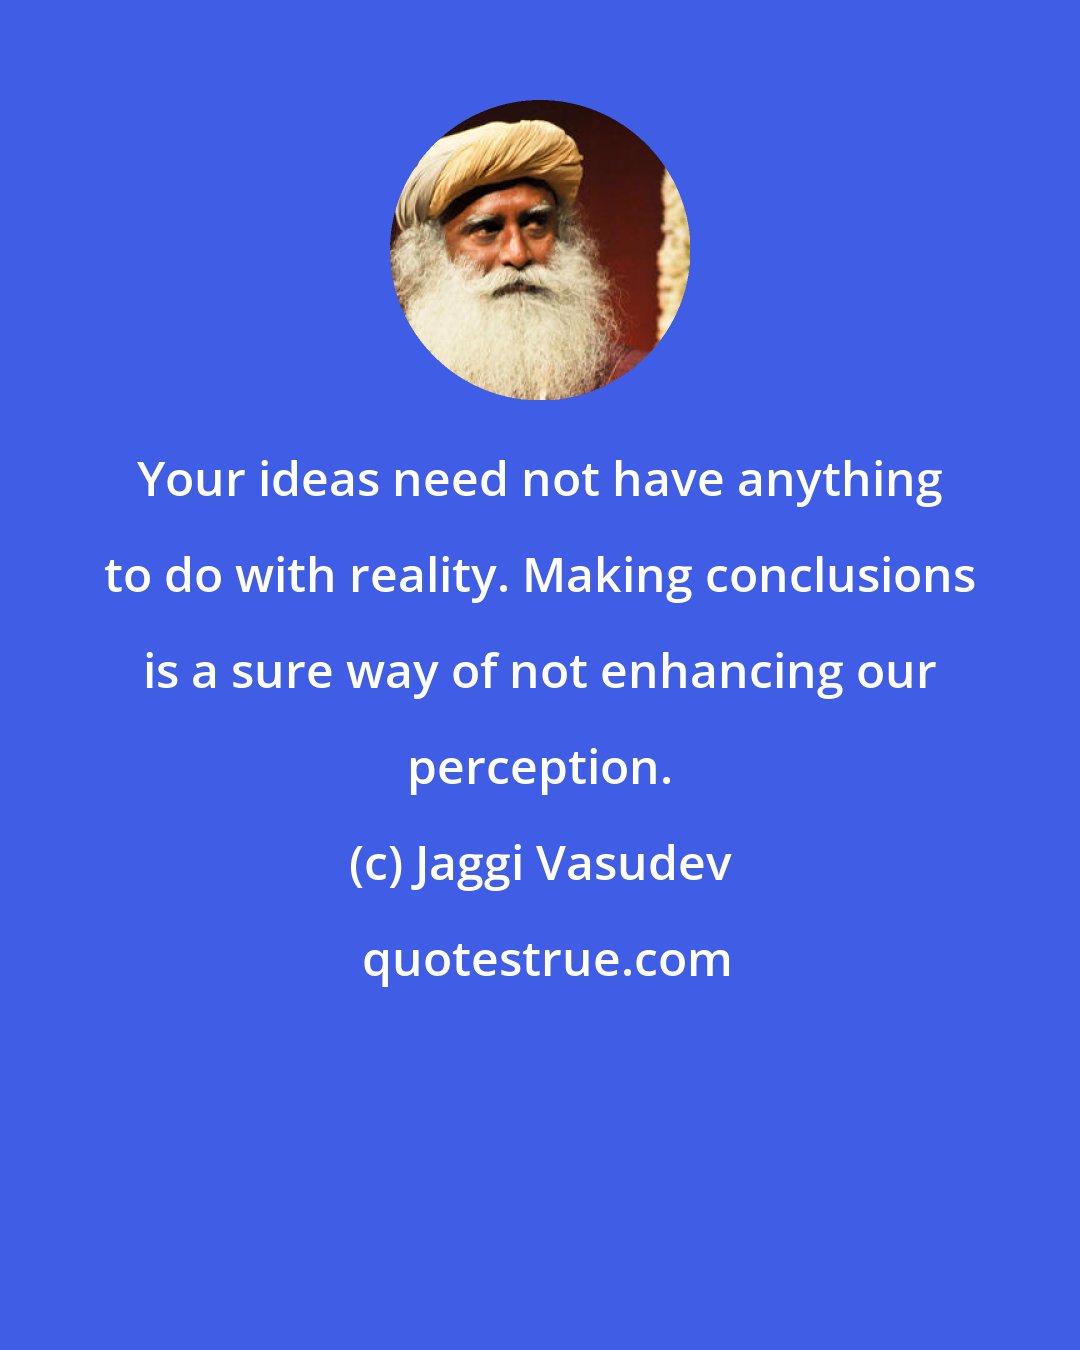 Jaggi Vasudev: Your ideas need not have anything to do with reality. Making conclusions is a sure way of not enhancing our perception.